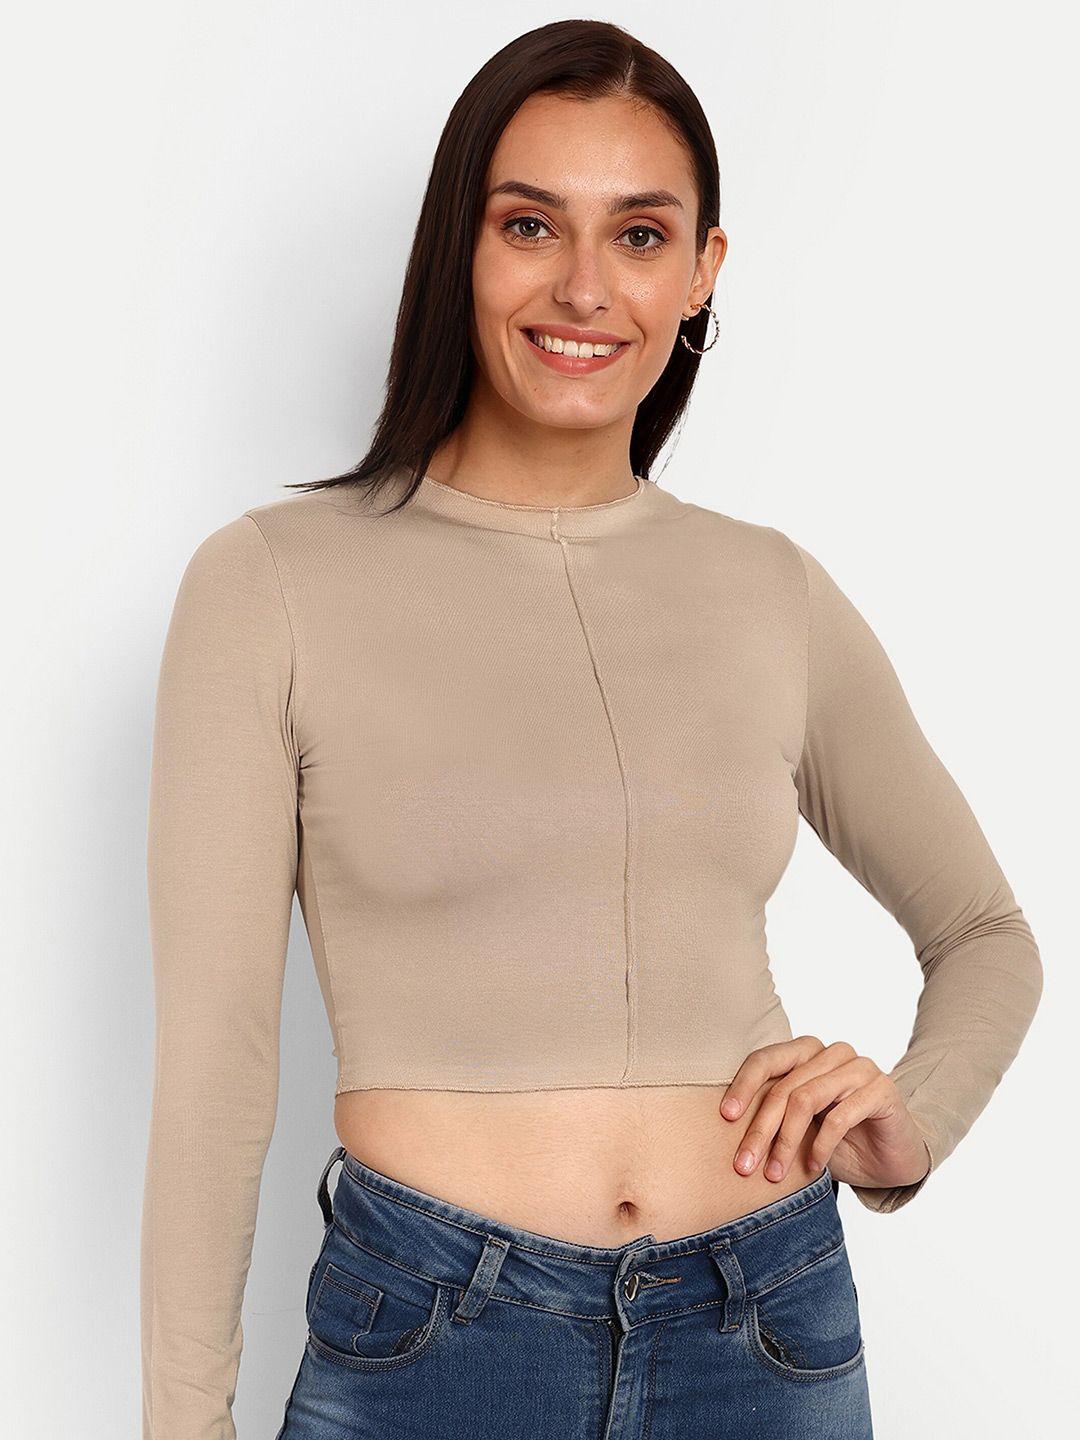 espresso-long-sleeves-crop-fitted-top